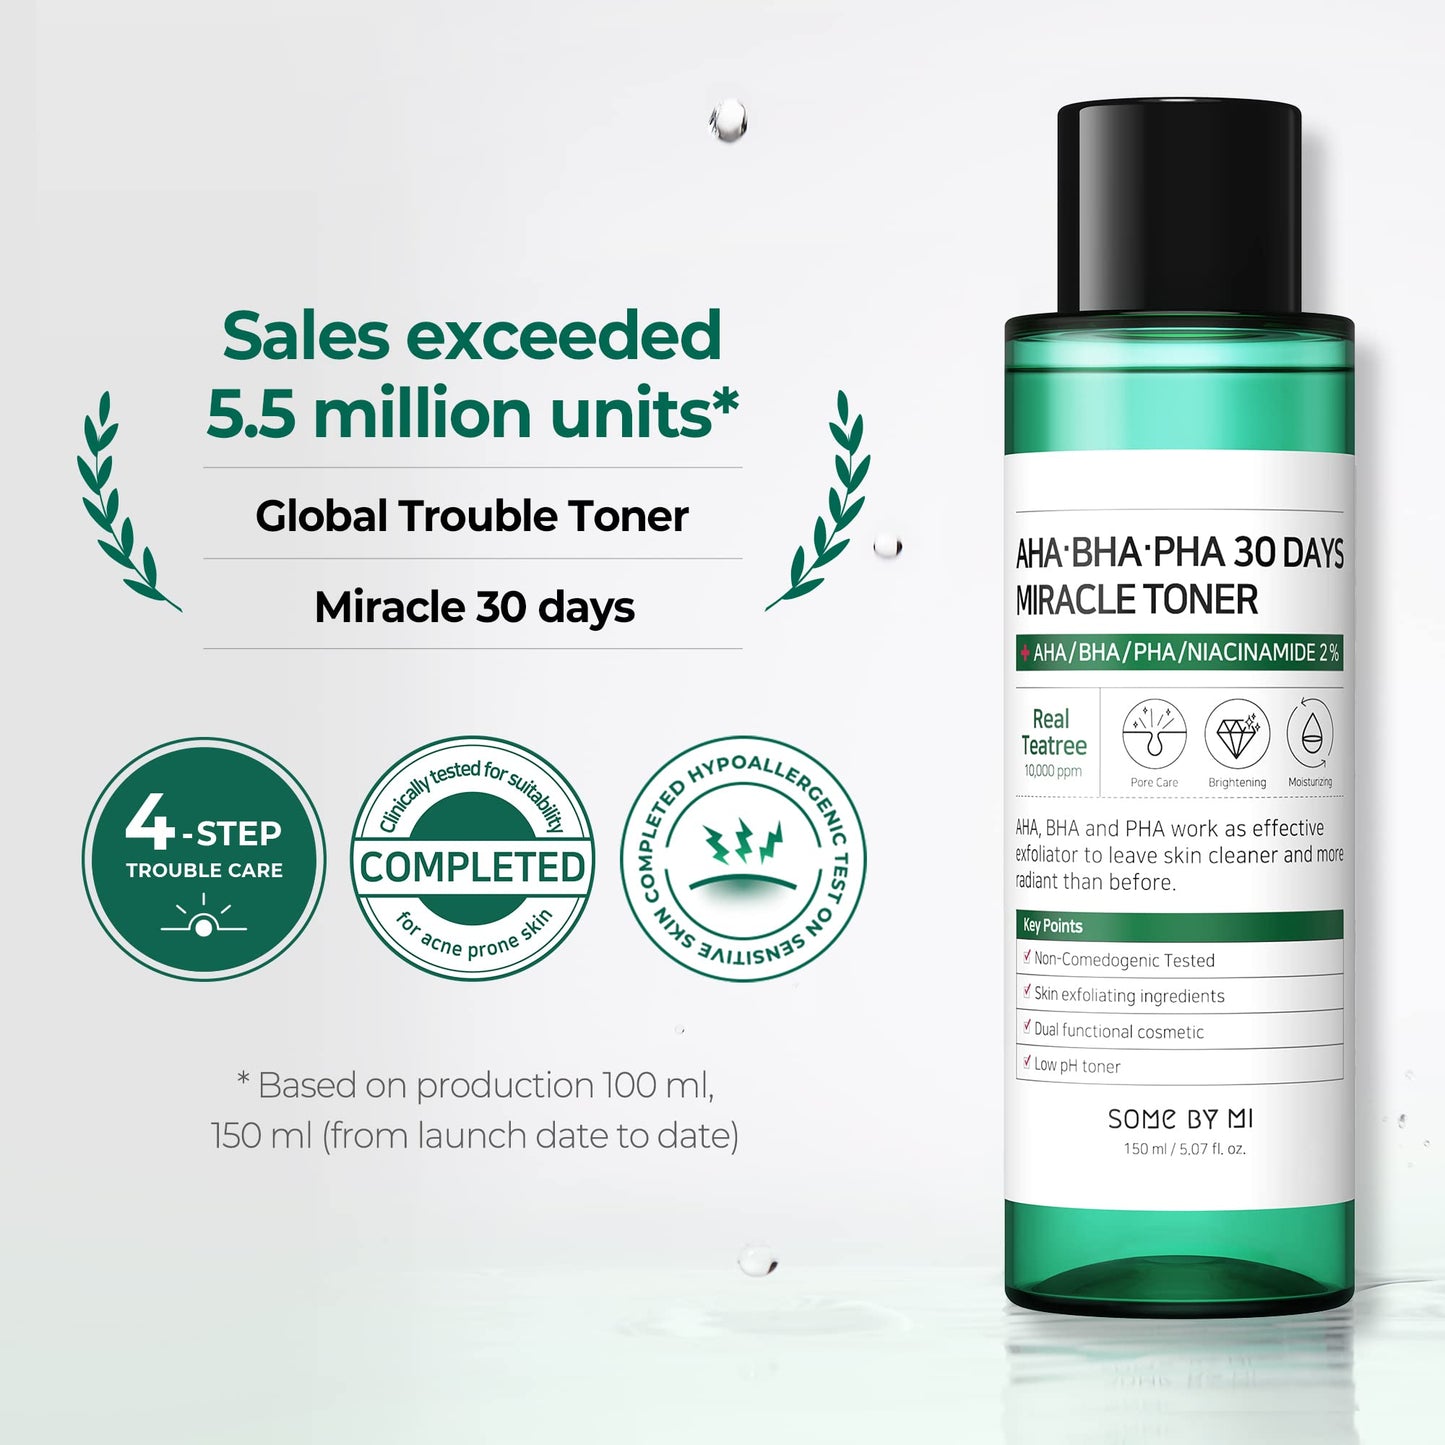 SOME BY MI AHA BHA PHA 30 Days Miracle Toner - 5.07Oz, 150ml - Made from Tea Tree Leaf Water for Sensitive Skin - Mild Exfoliating Daily Face Toner - Acne, Sebum and Oiliness Care - Korean Skin Care